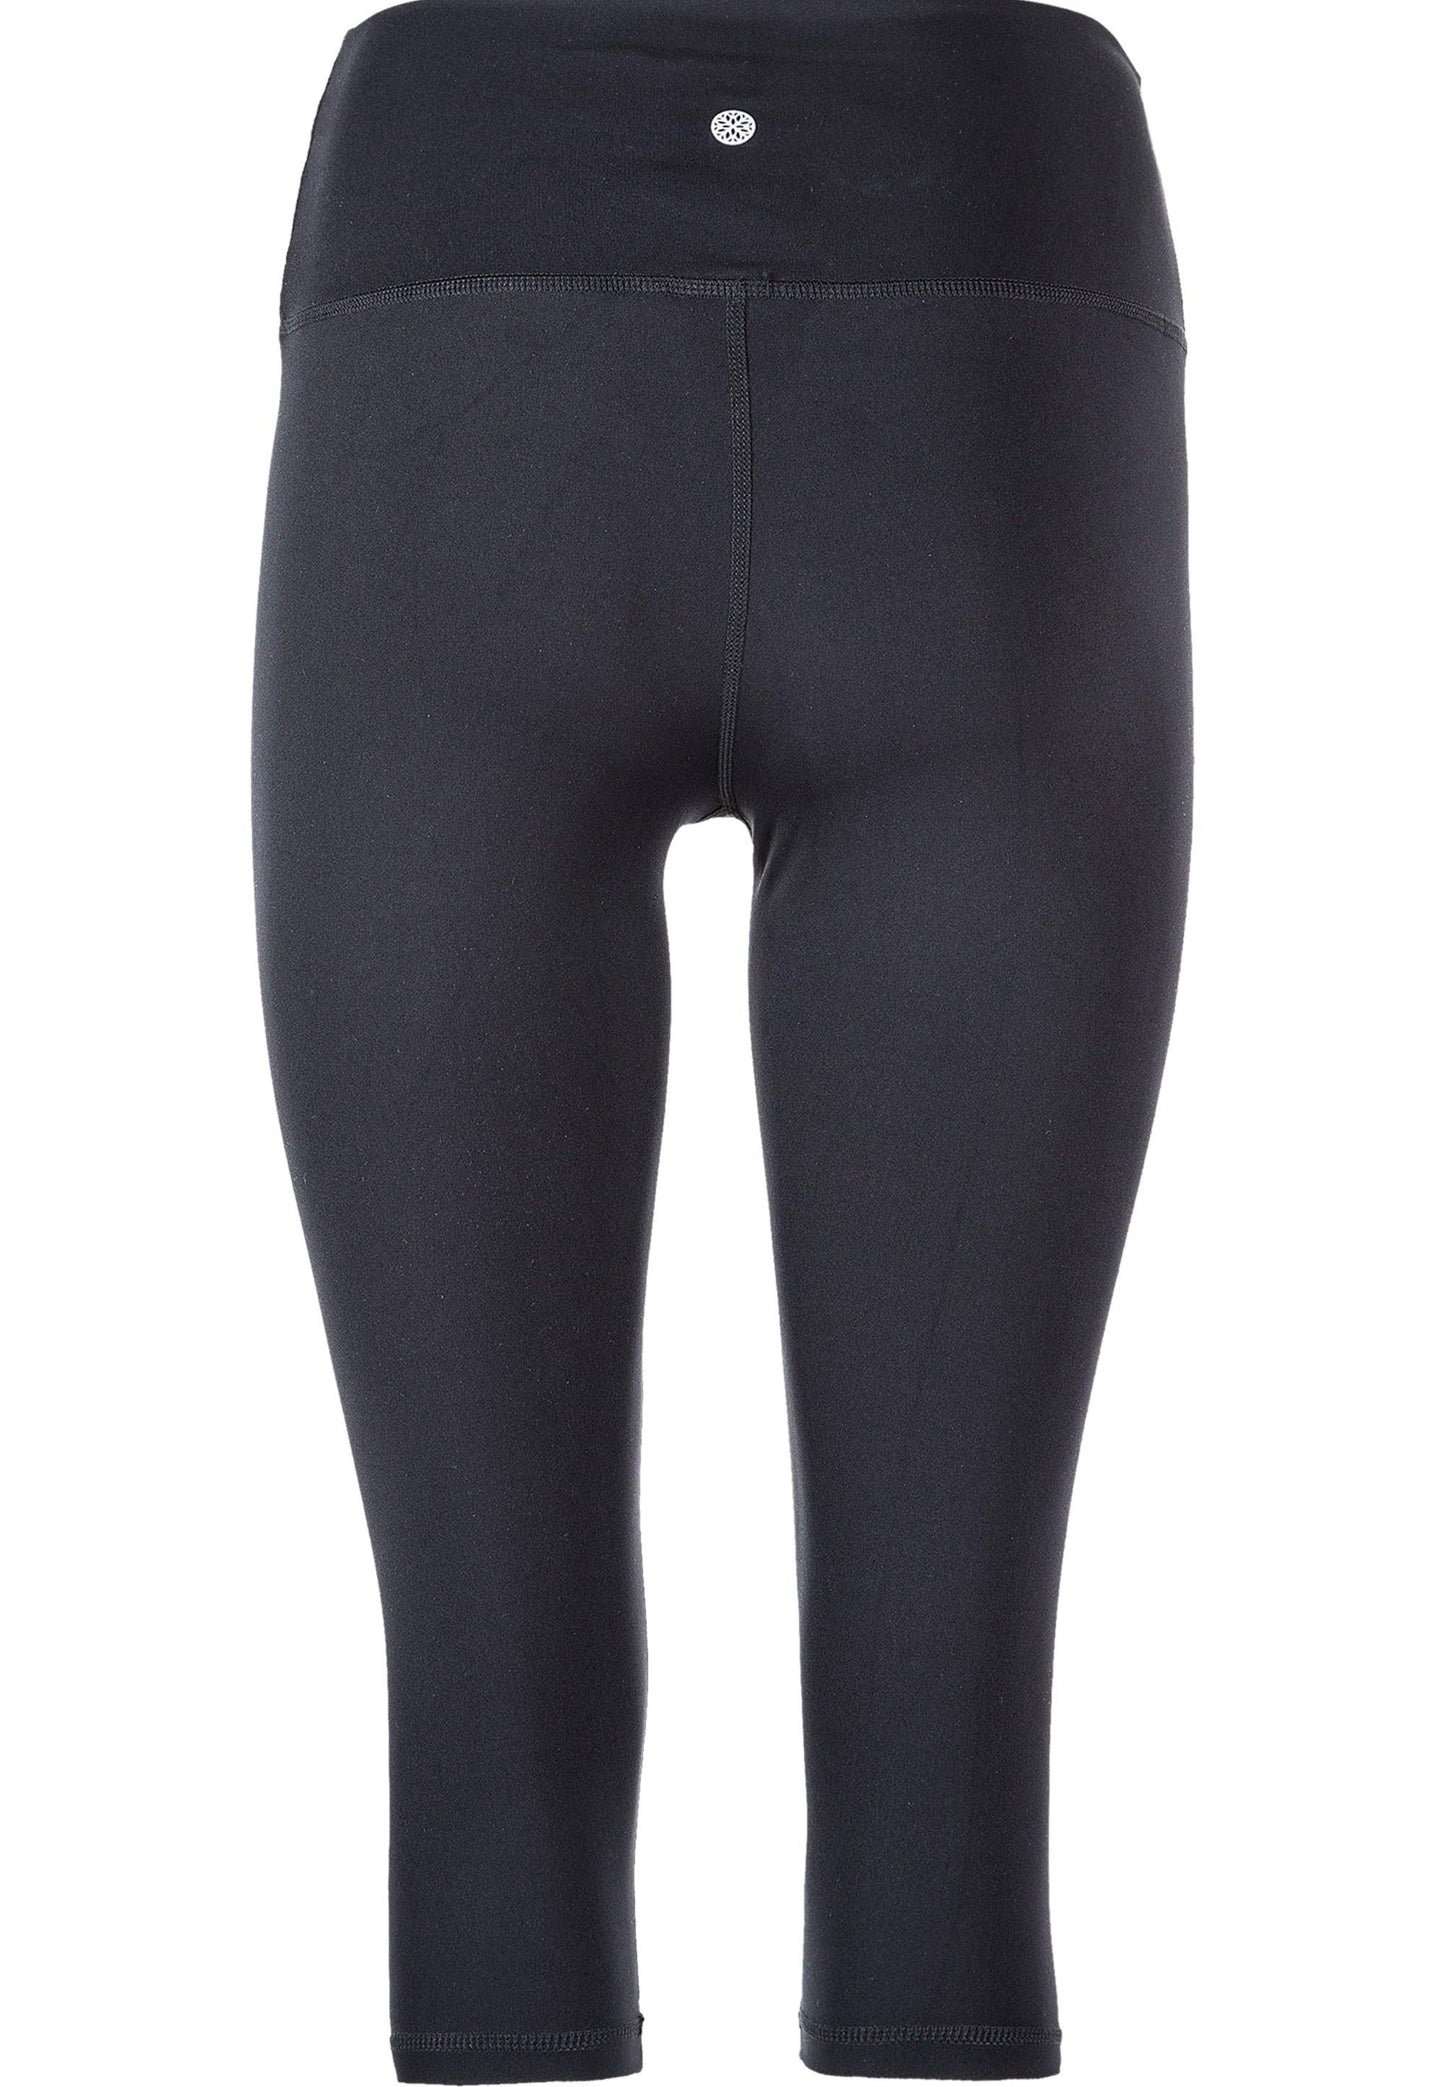 {{product.type}} - Athlecia Franz 3/4 Waist Tights - Pancho Michael {{ shop.address.country }}